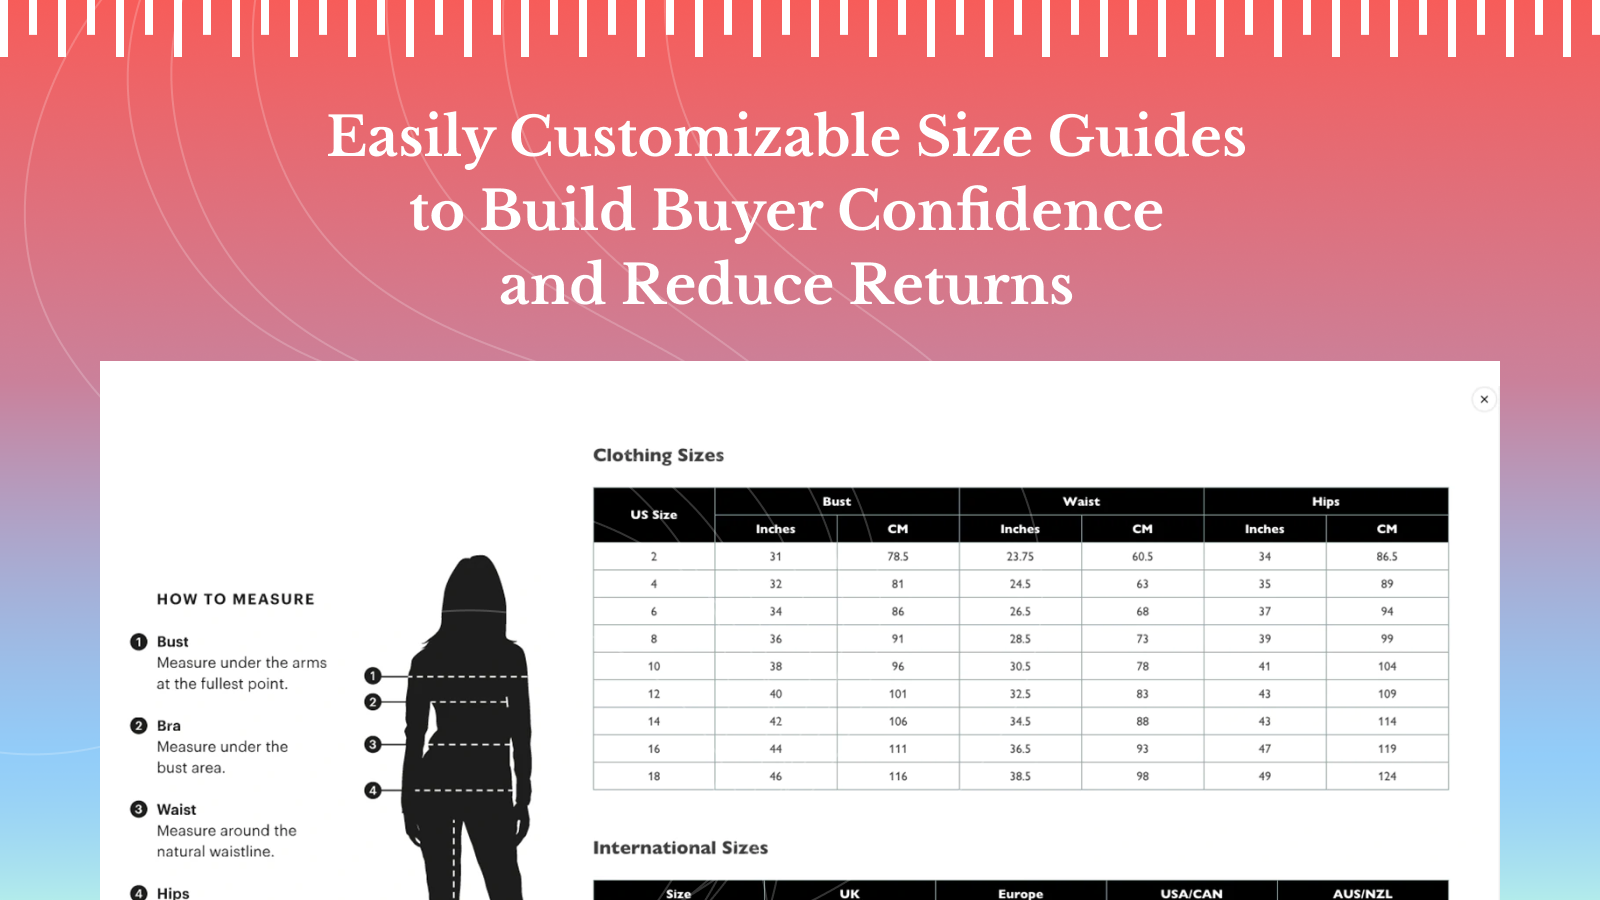 Easily customizable size charts to build buyer confidence 